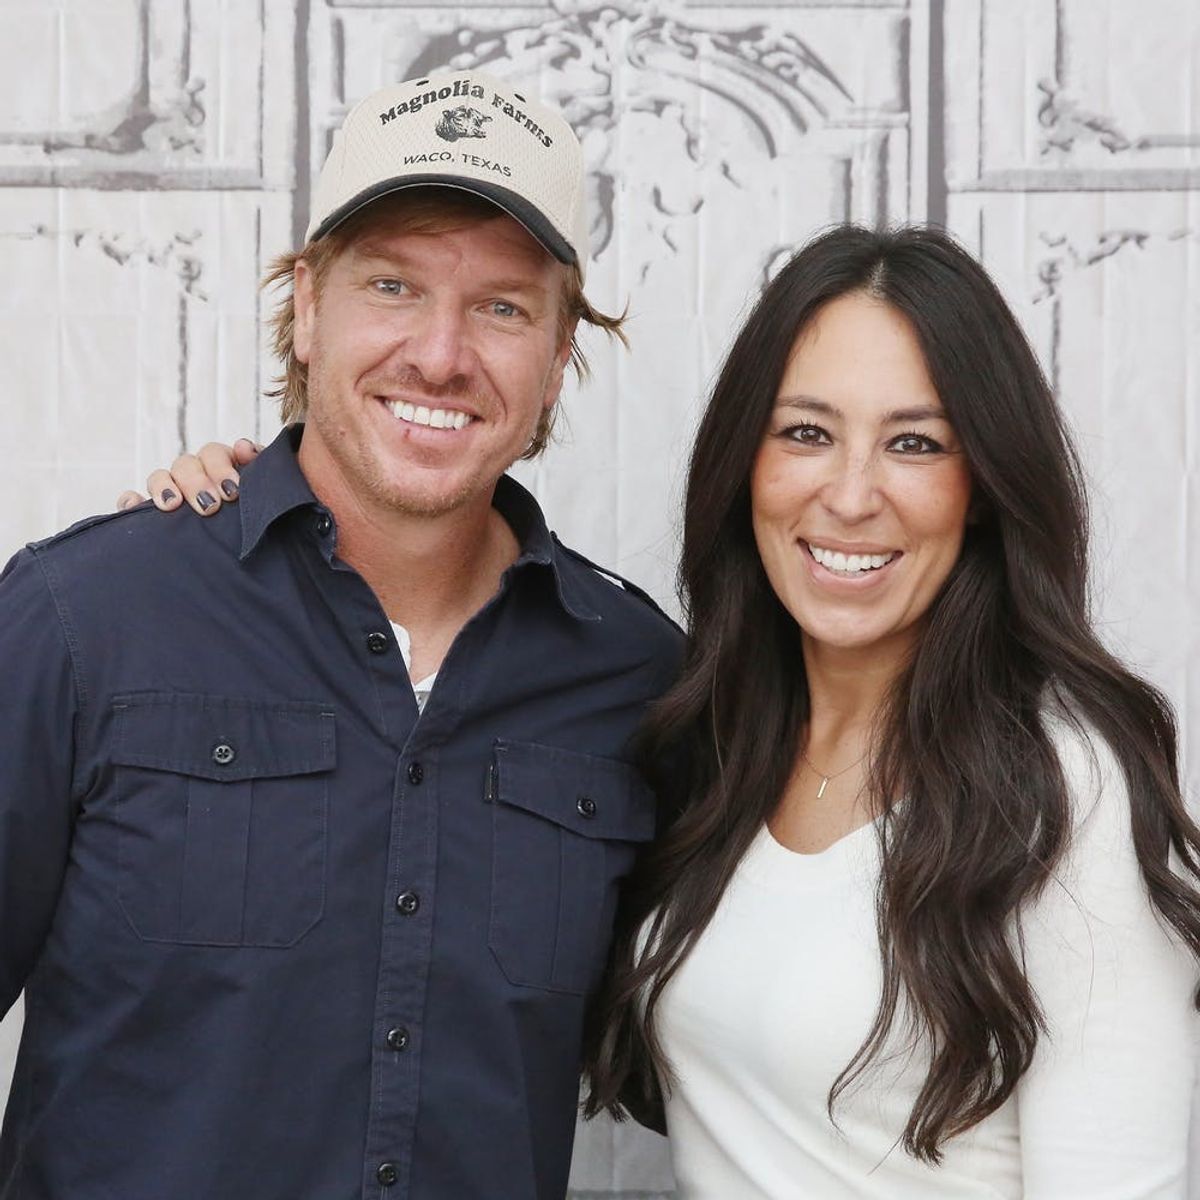 Chip and Joanna Gaines Hint at Their Plans for a Baby Name